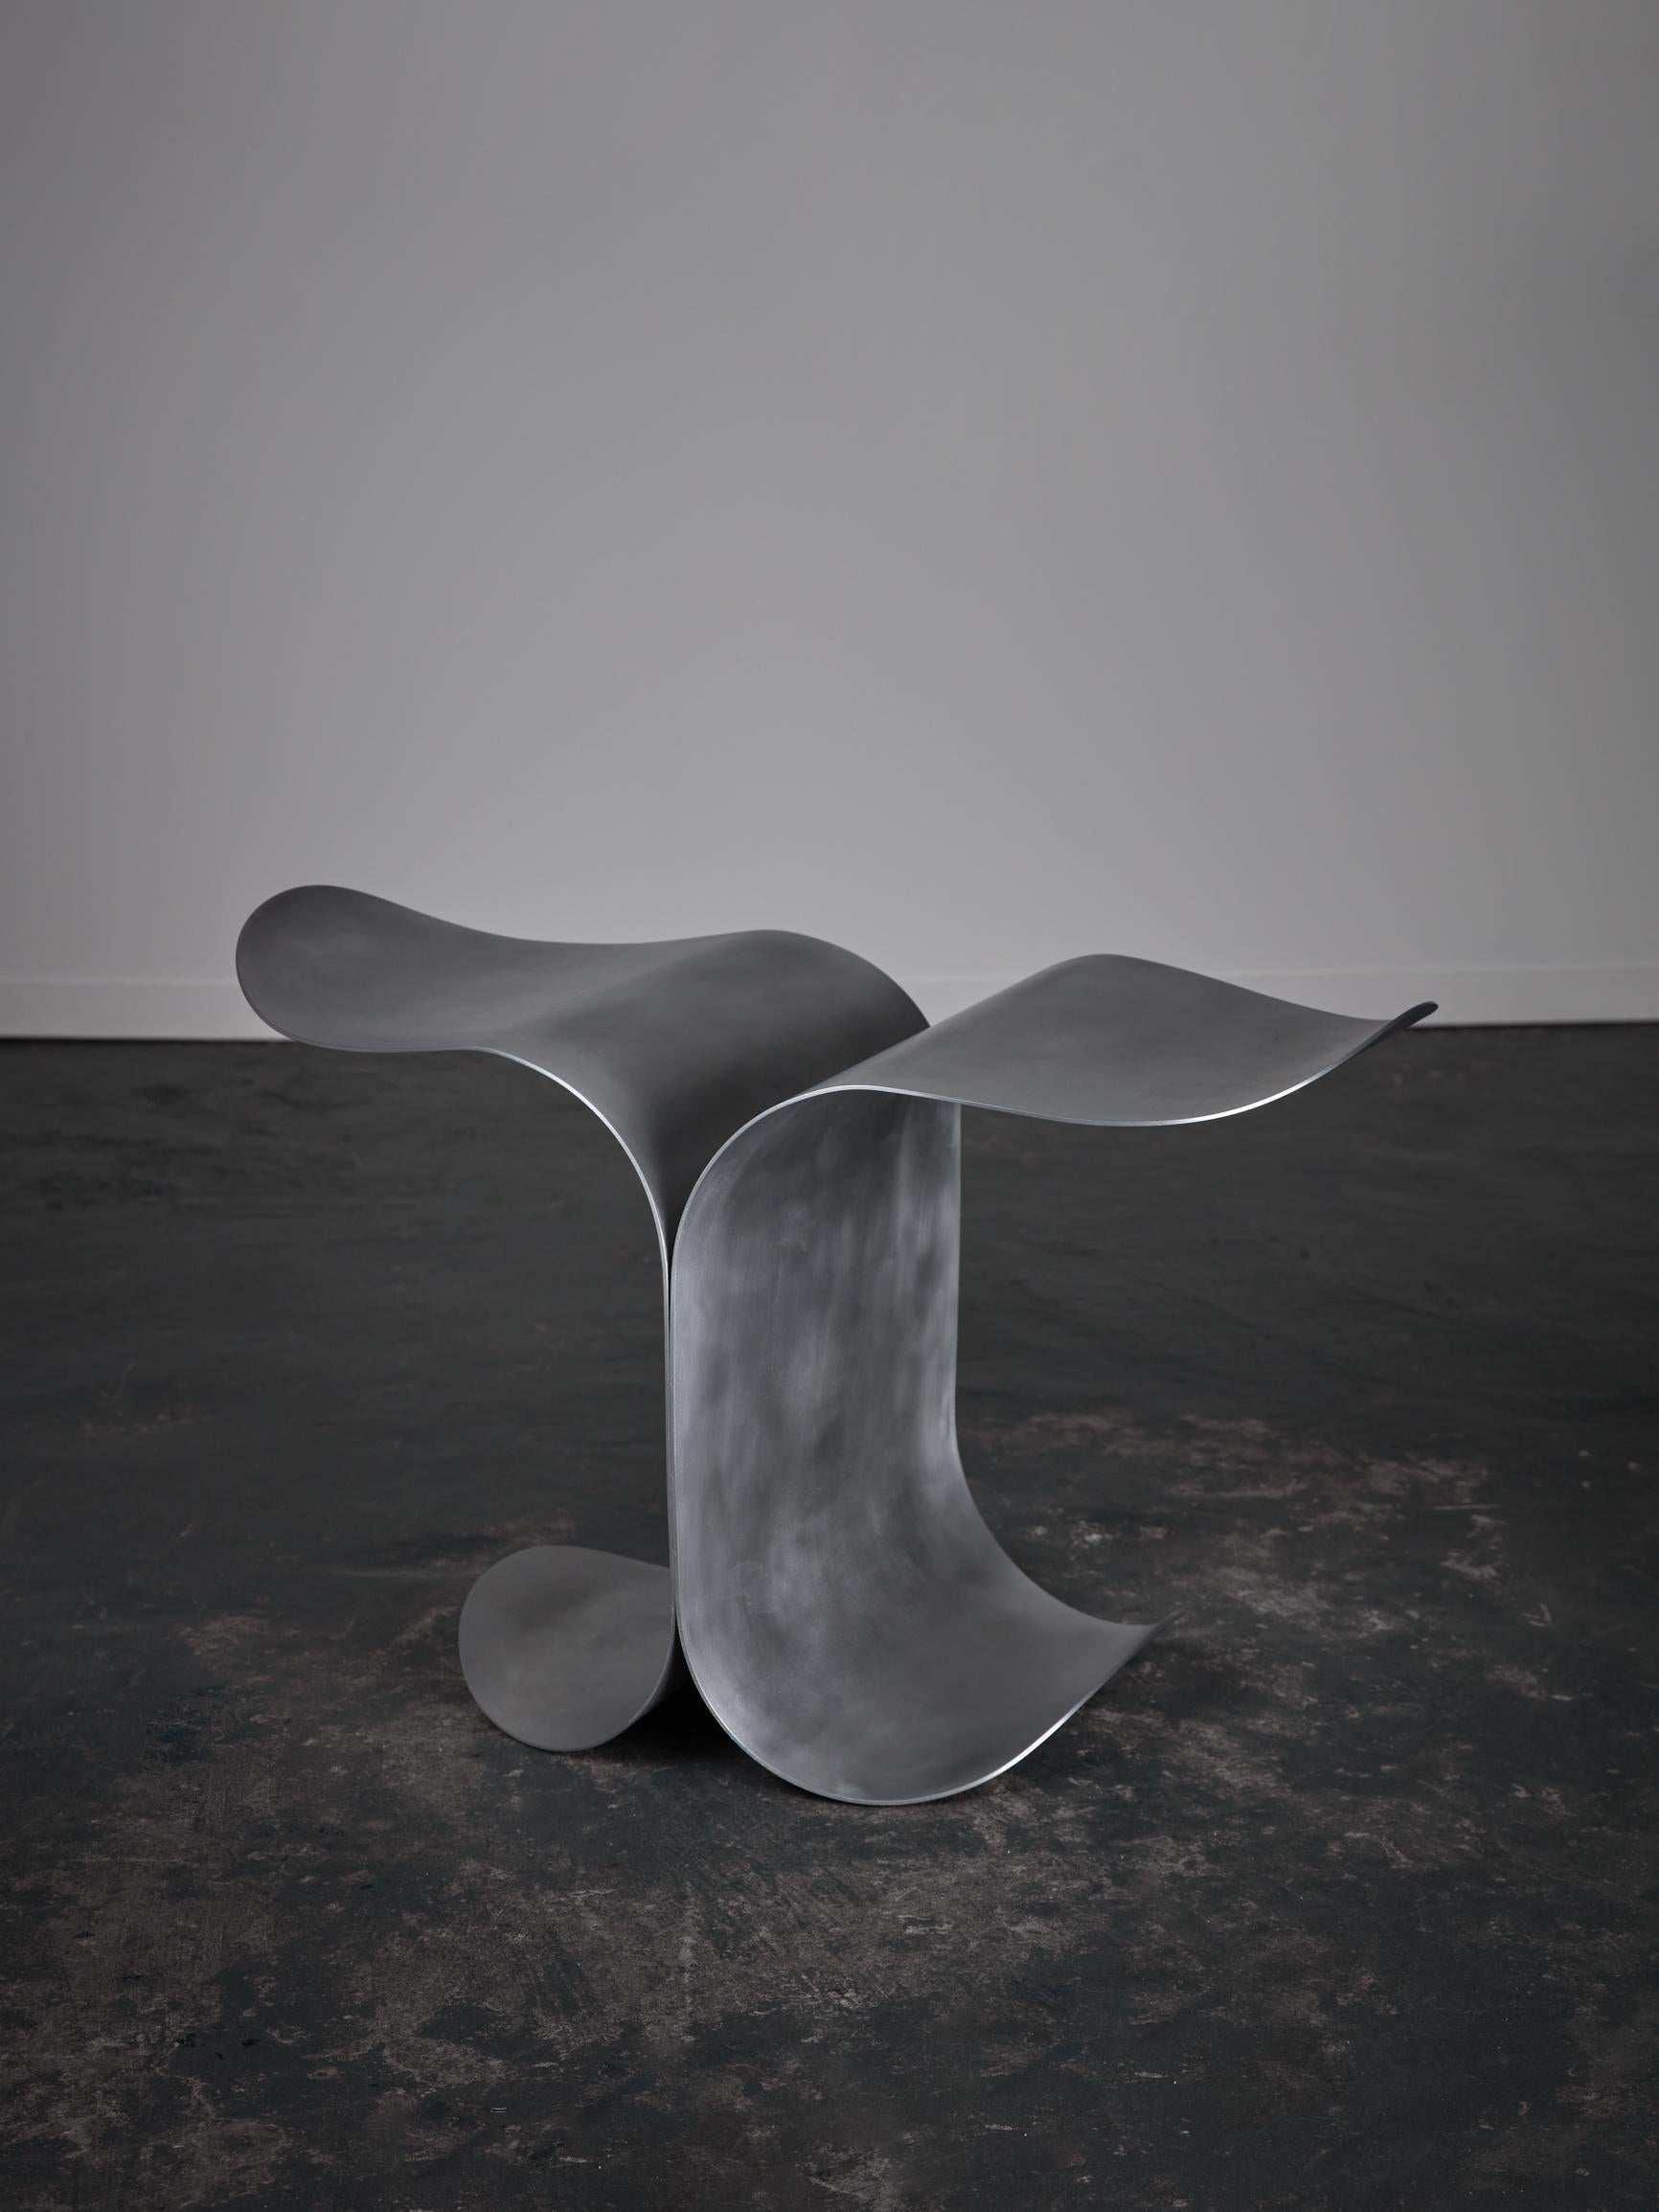 Medium Waves Side Table by Yoon Shun
Dimensions: D 47.5 x W 79 x H 48 cm. 
Materials: Aluminum and silicone. 

This side table is made of 3MM aluminum. Hands machine rolled, polished, and silicon coated. Available in three different sizes and in a